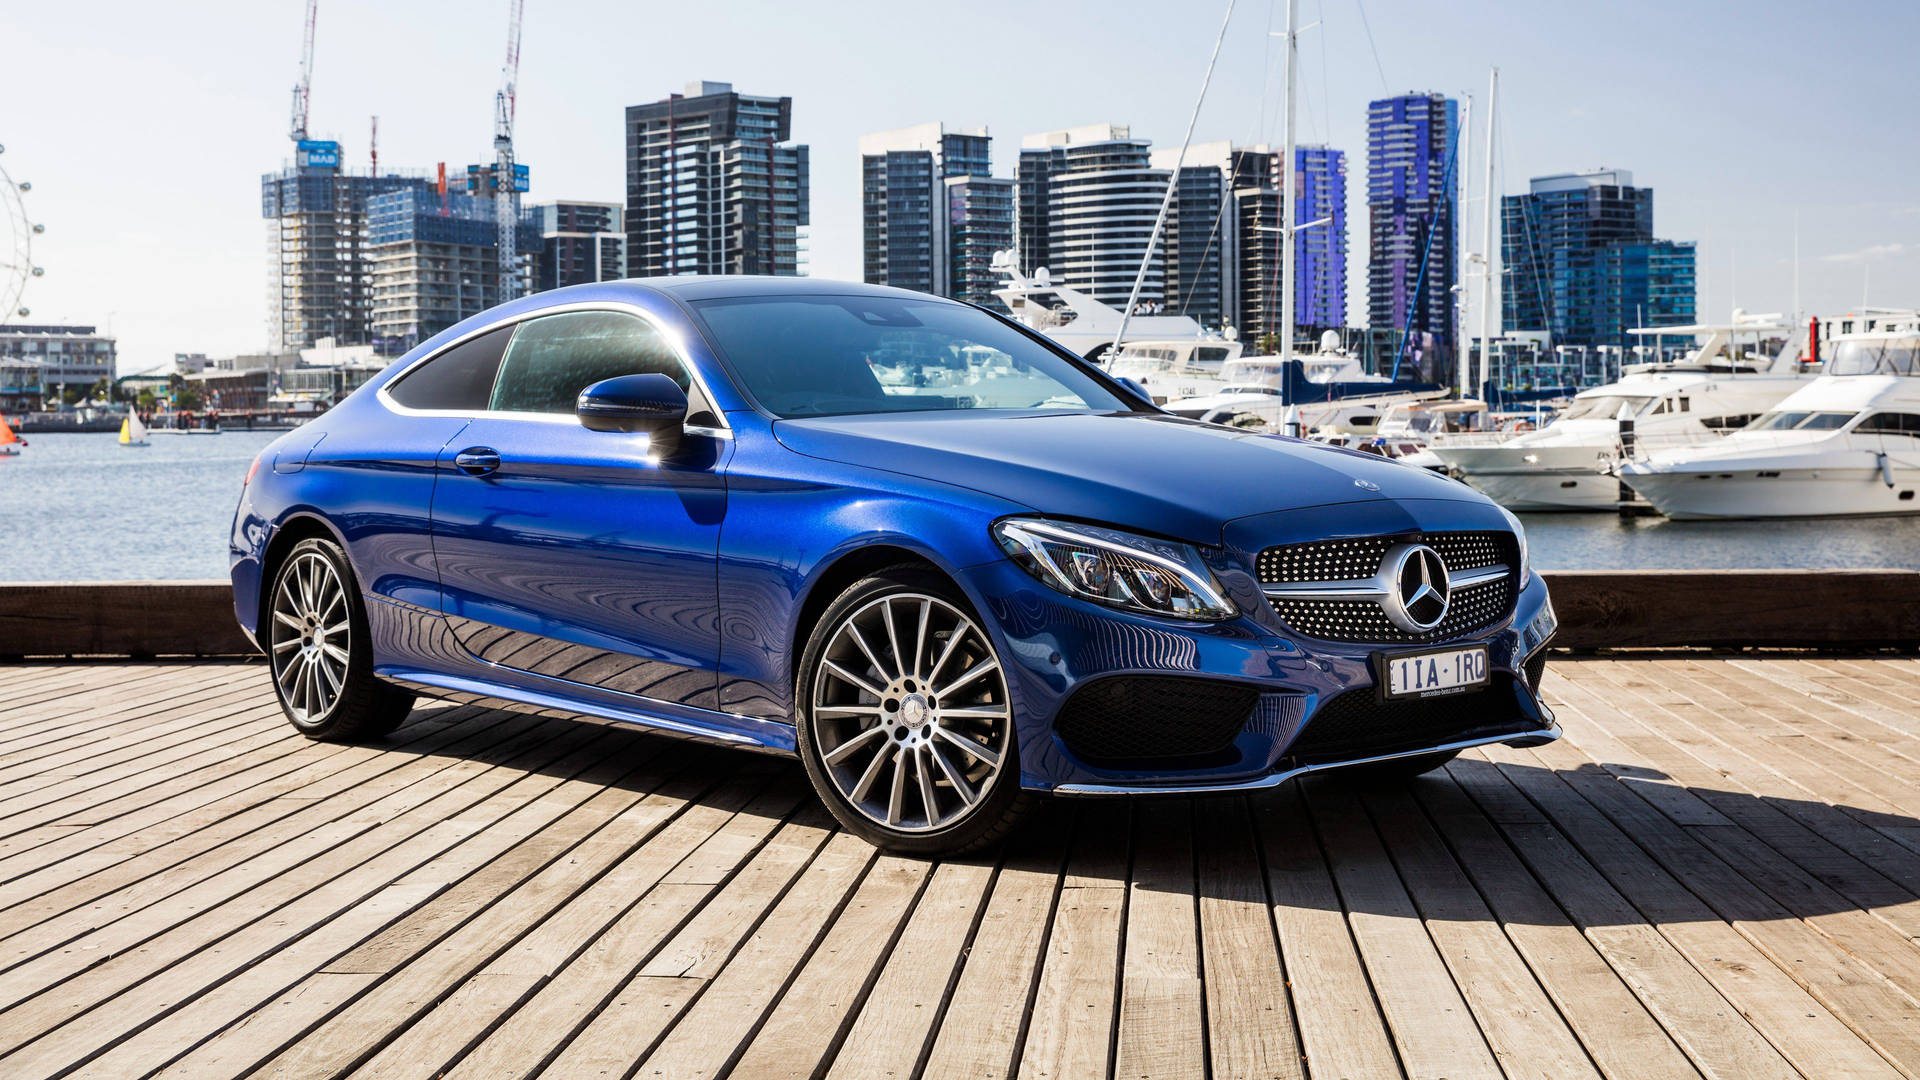 Luxurious Mercedes-Benz C300 at the Dockside Wallpaper